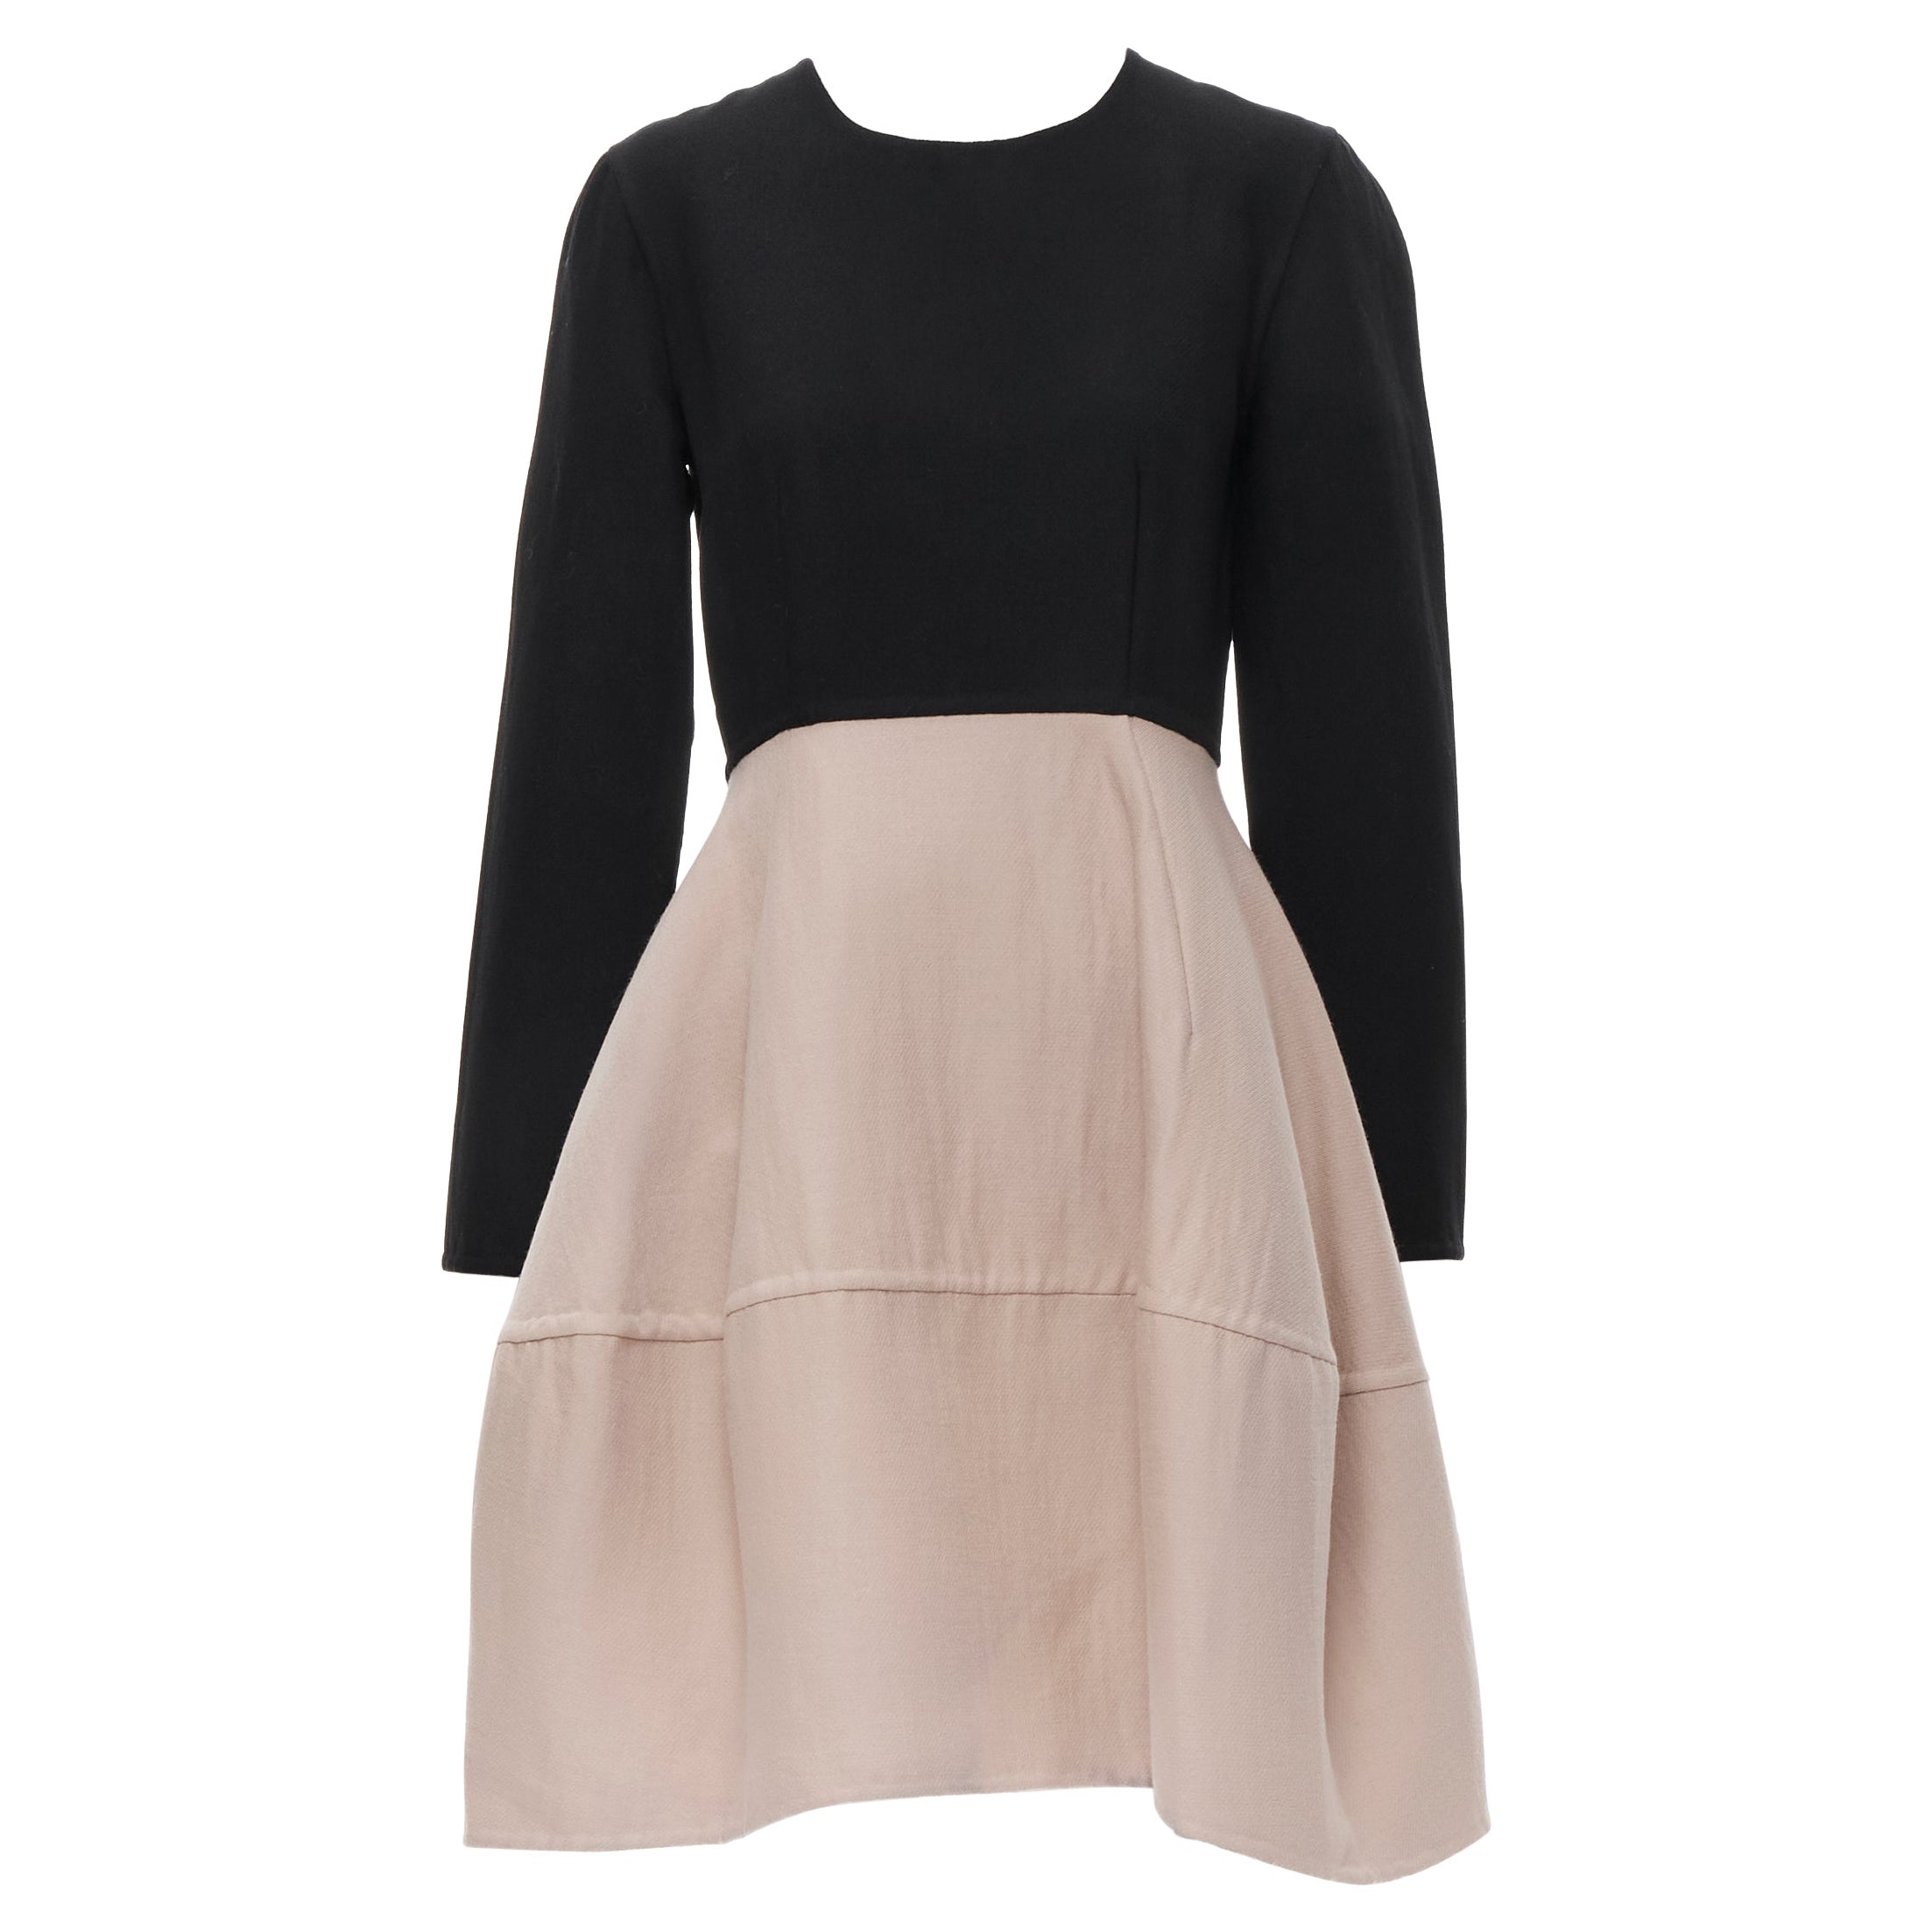 MARNI black nude wool crepe long sleeve bubble skirt fit flared dress IT38 XS For Sale